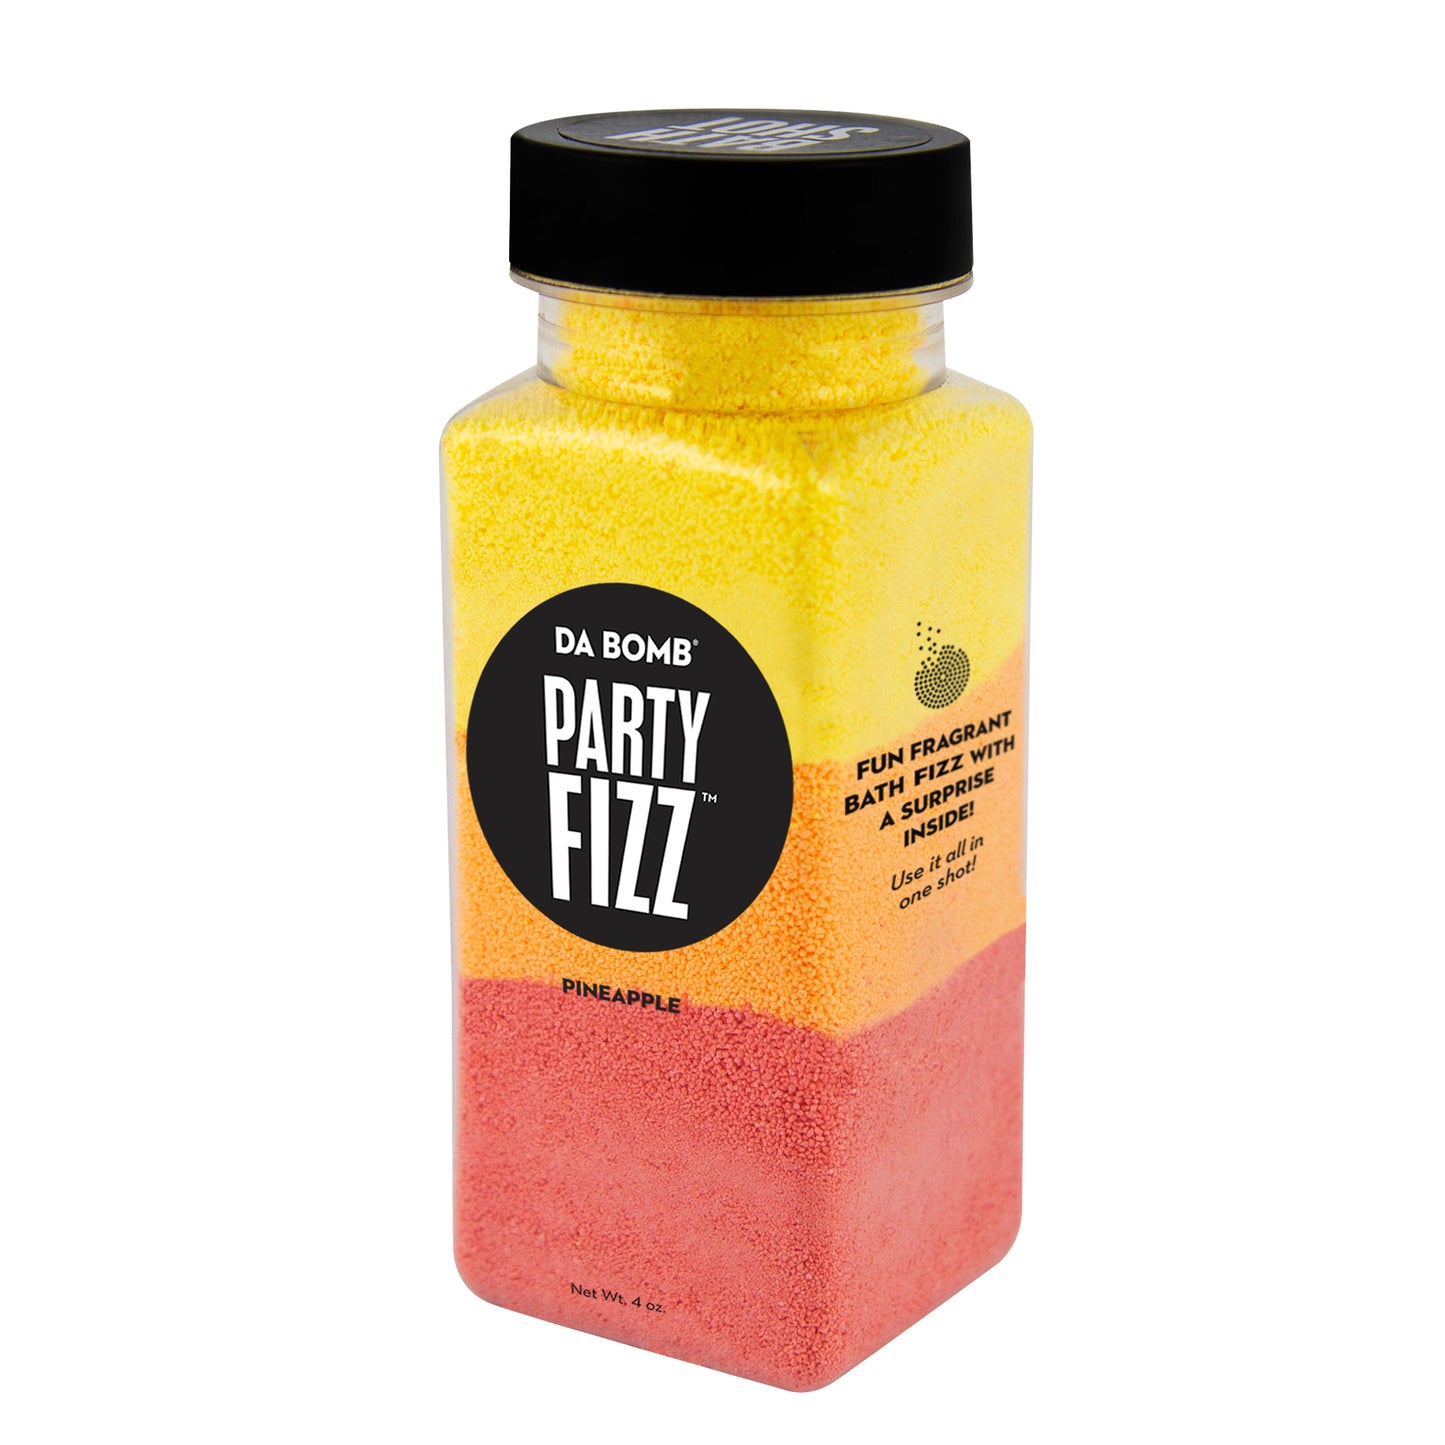 Small, clear plastic jar containing color block red, orange and yellow bath fizz that smells like pineapple. Contains a fun surprise.